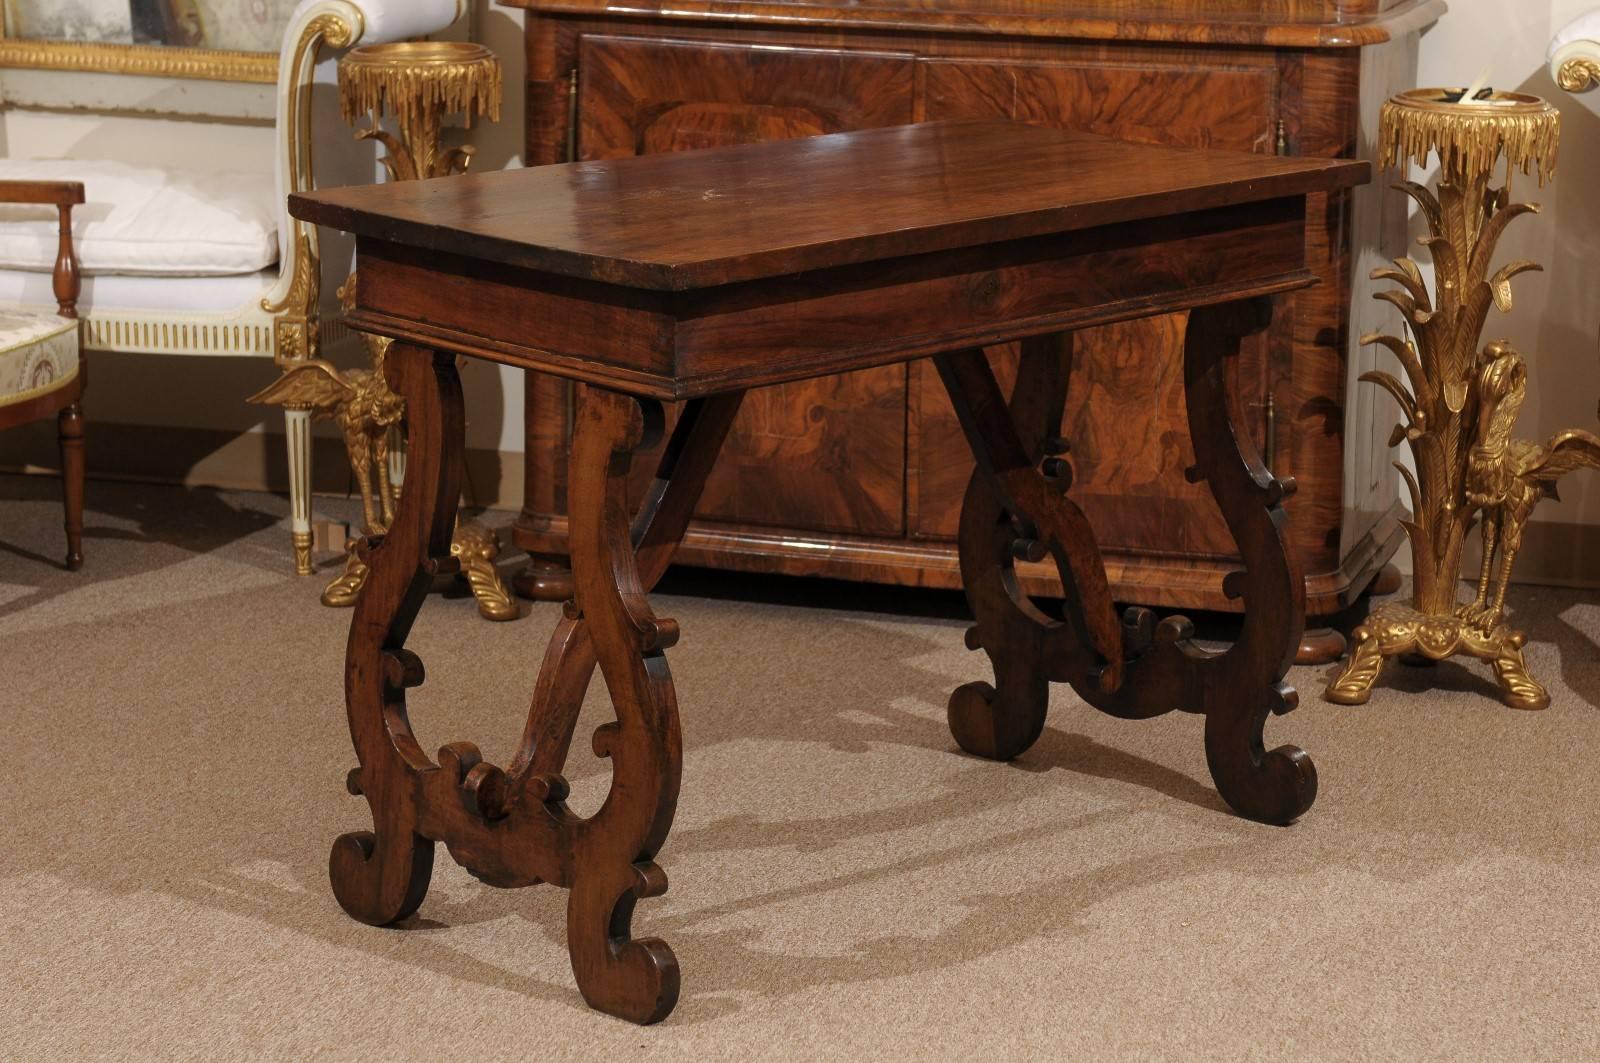 A 18th century Italian walnut console table with lyre formed legs.